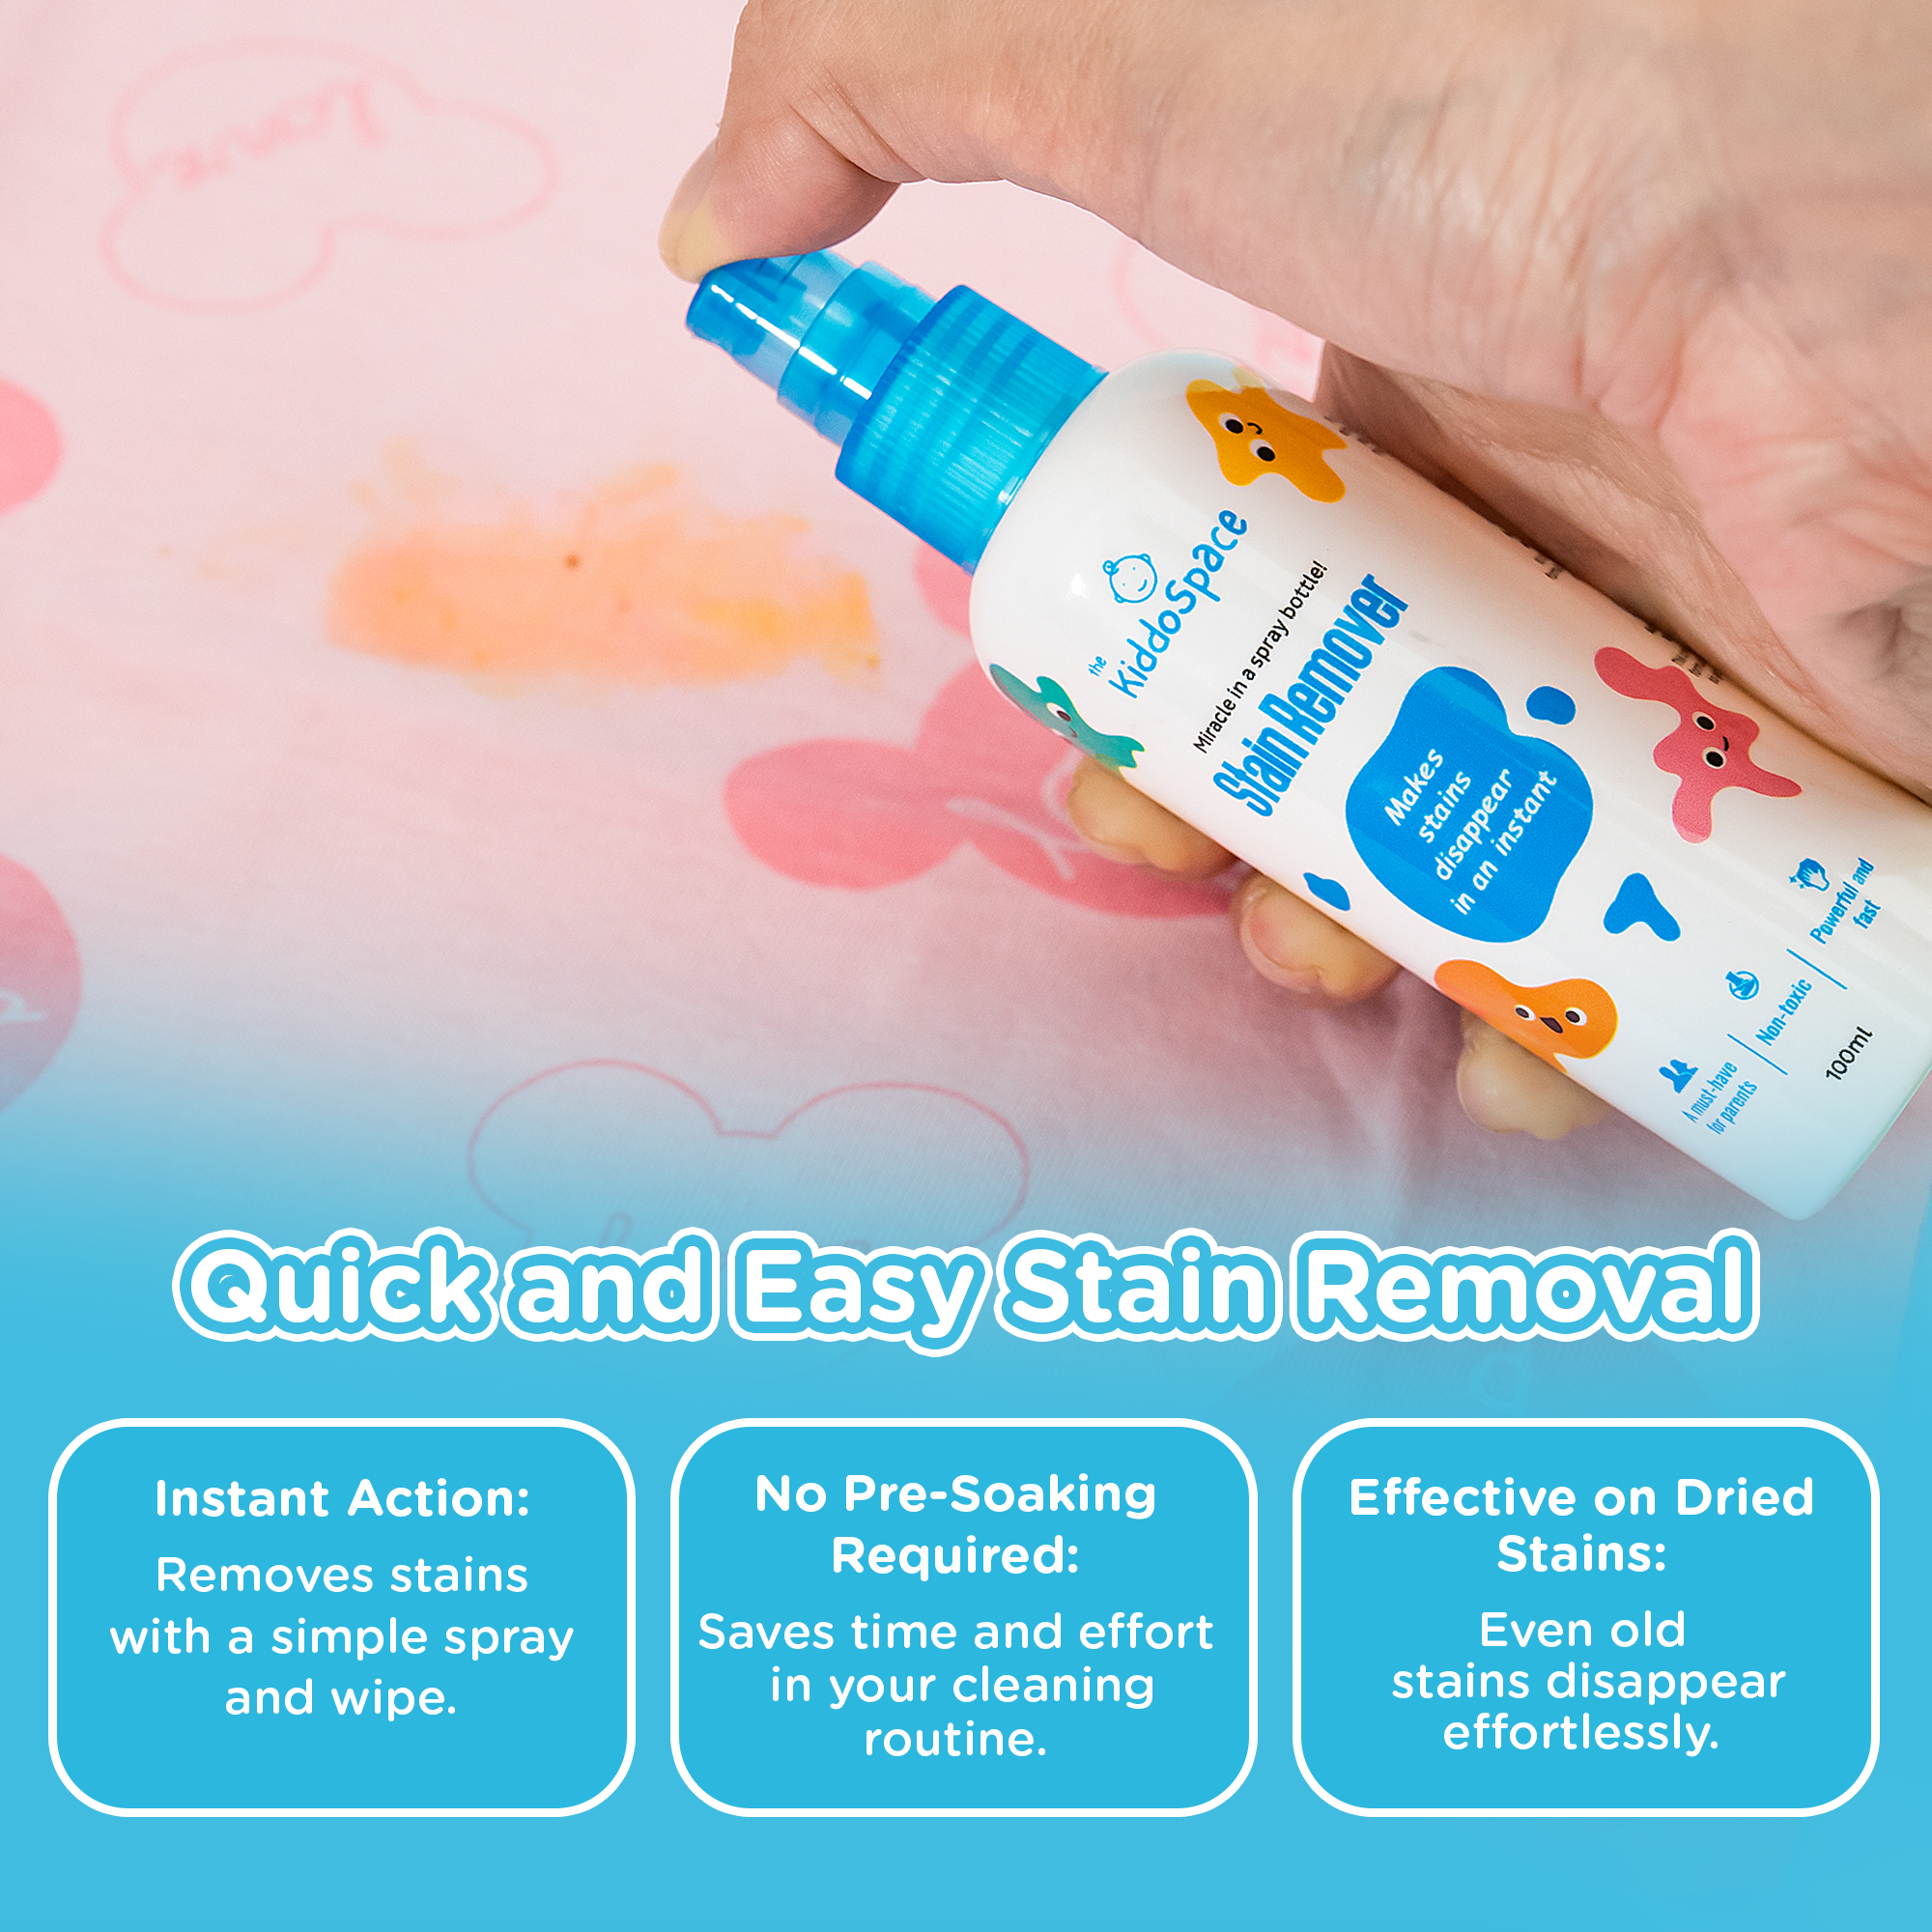 KiddoSpace Stain Remover Kit